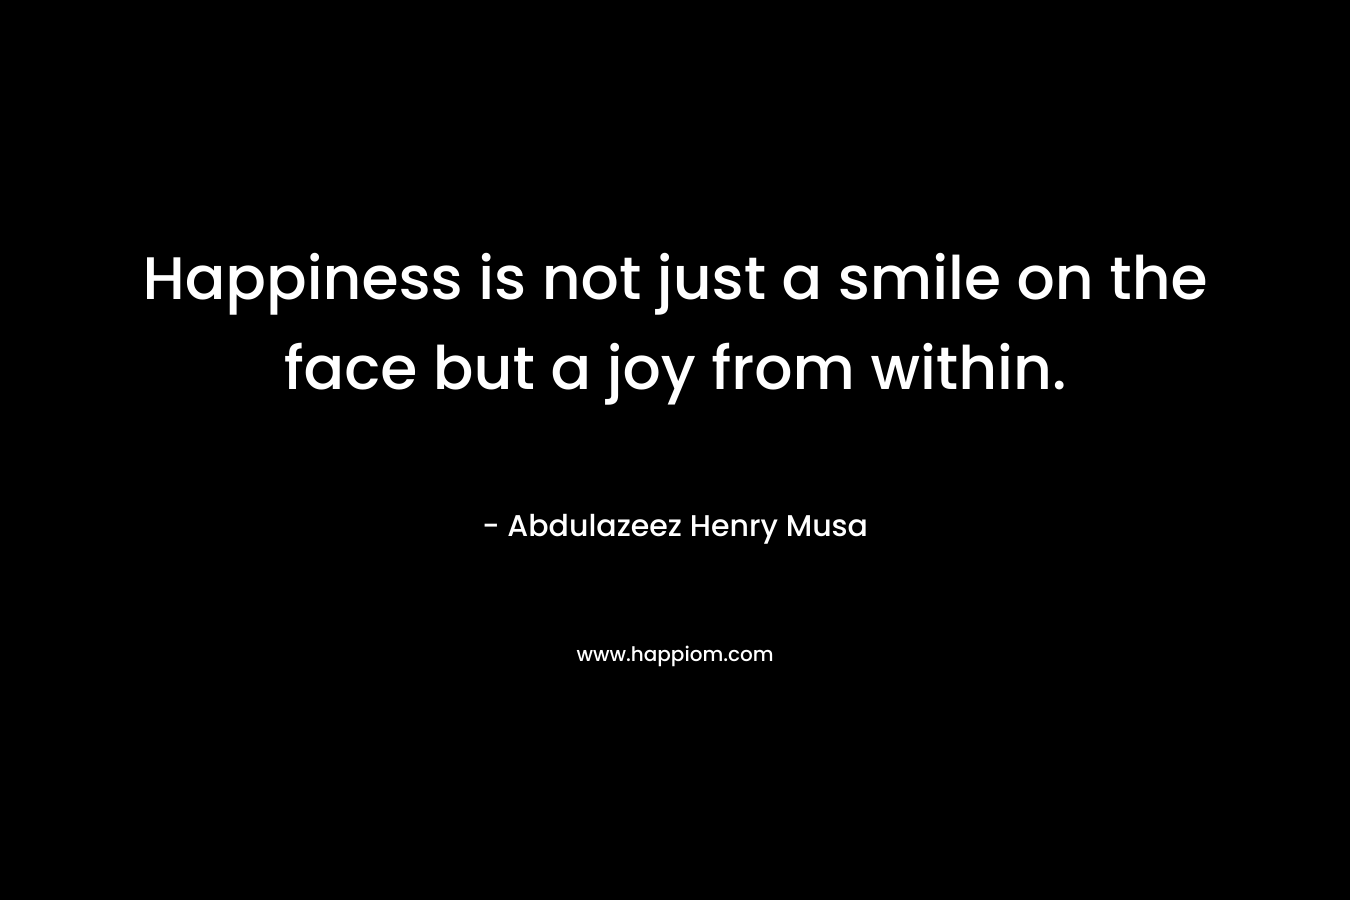 Happiness is not just a smile on the face but a joy from within.